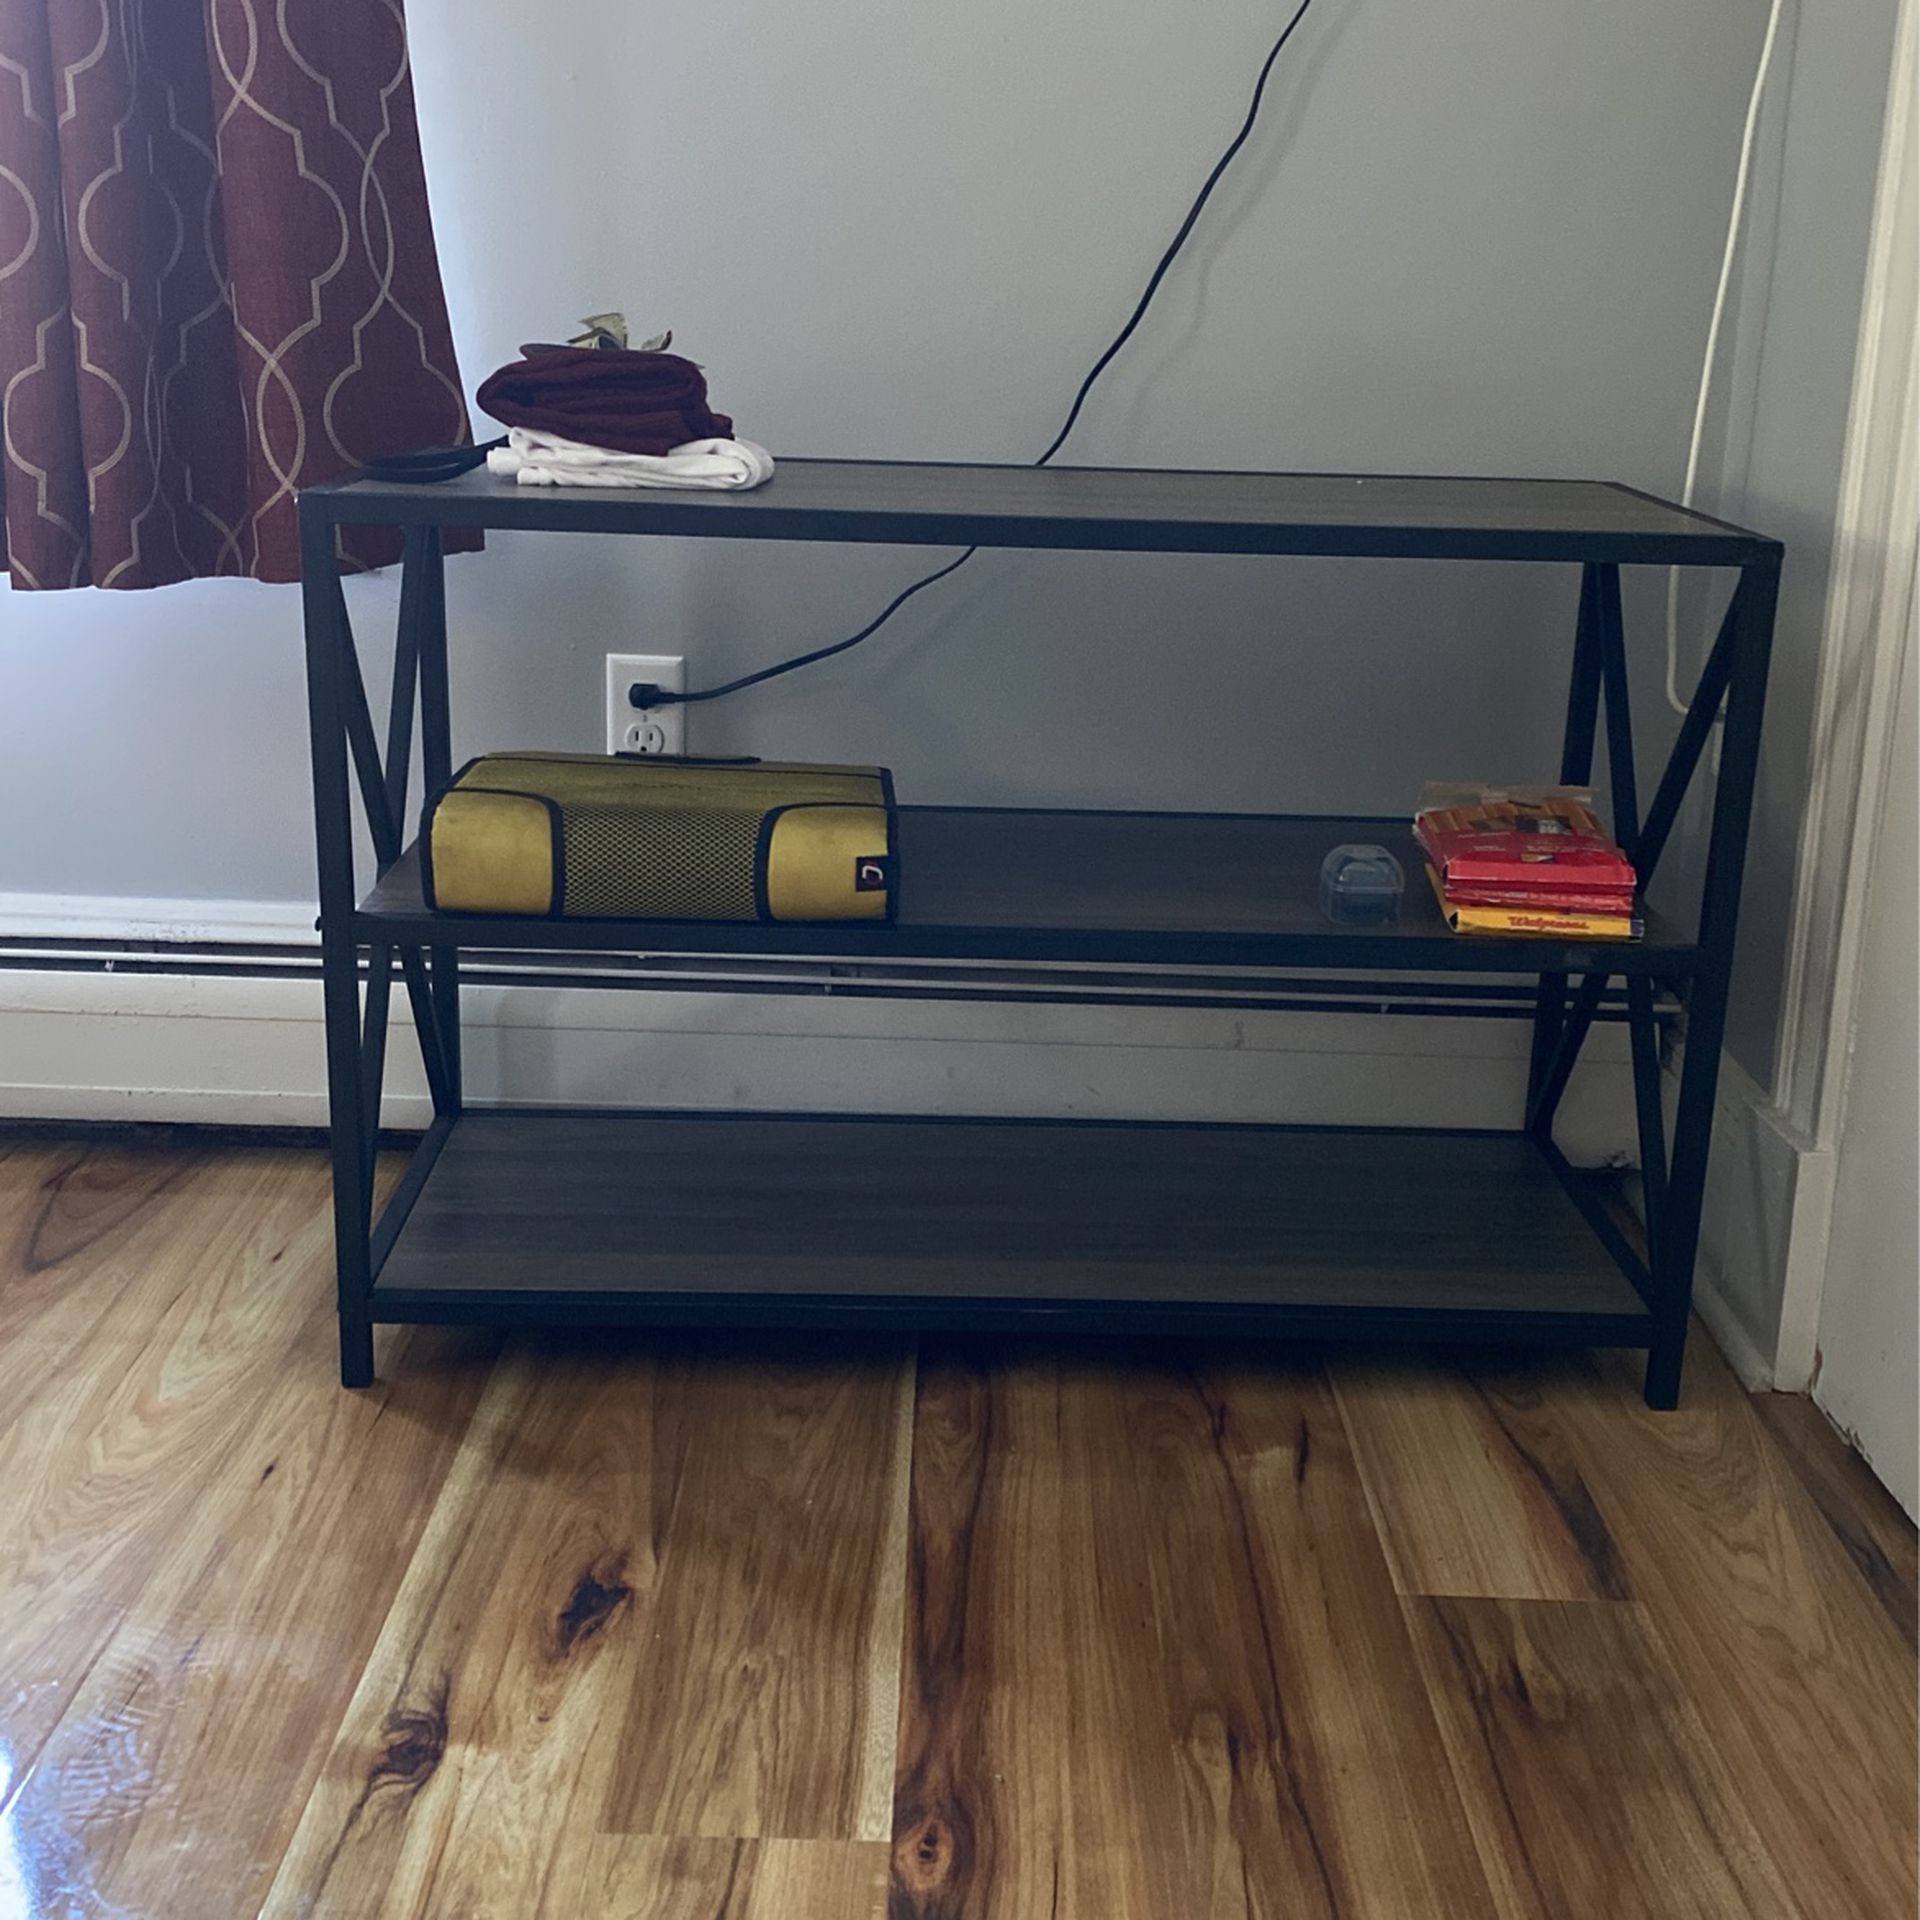 TV Stand, Table, Bench or Something Else